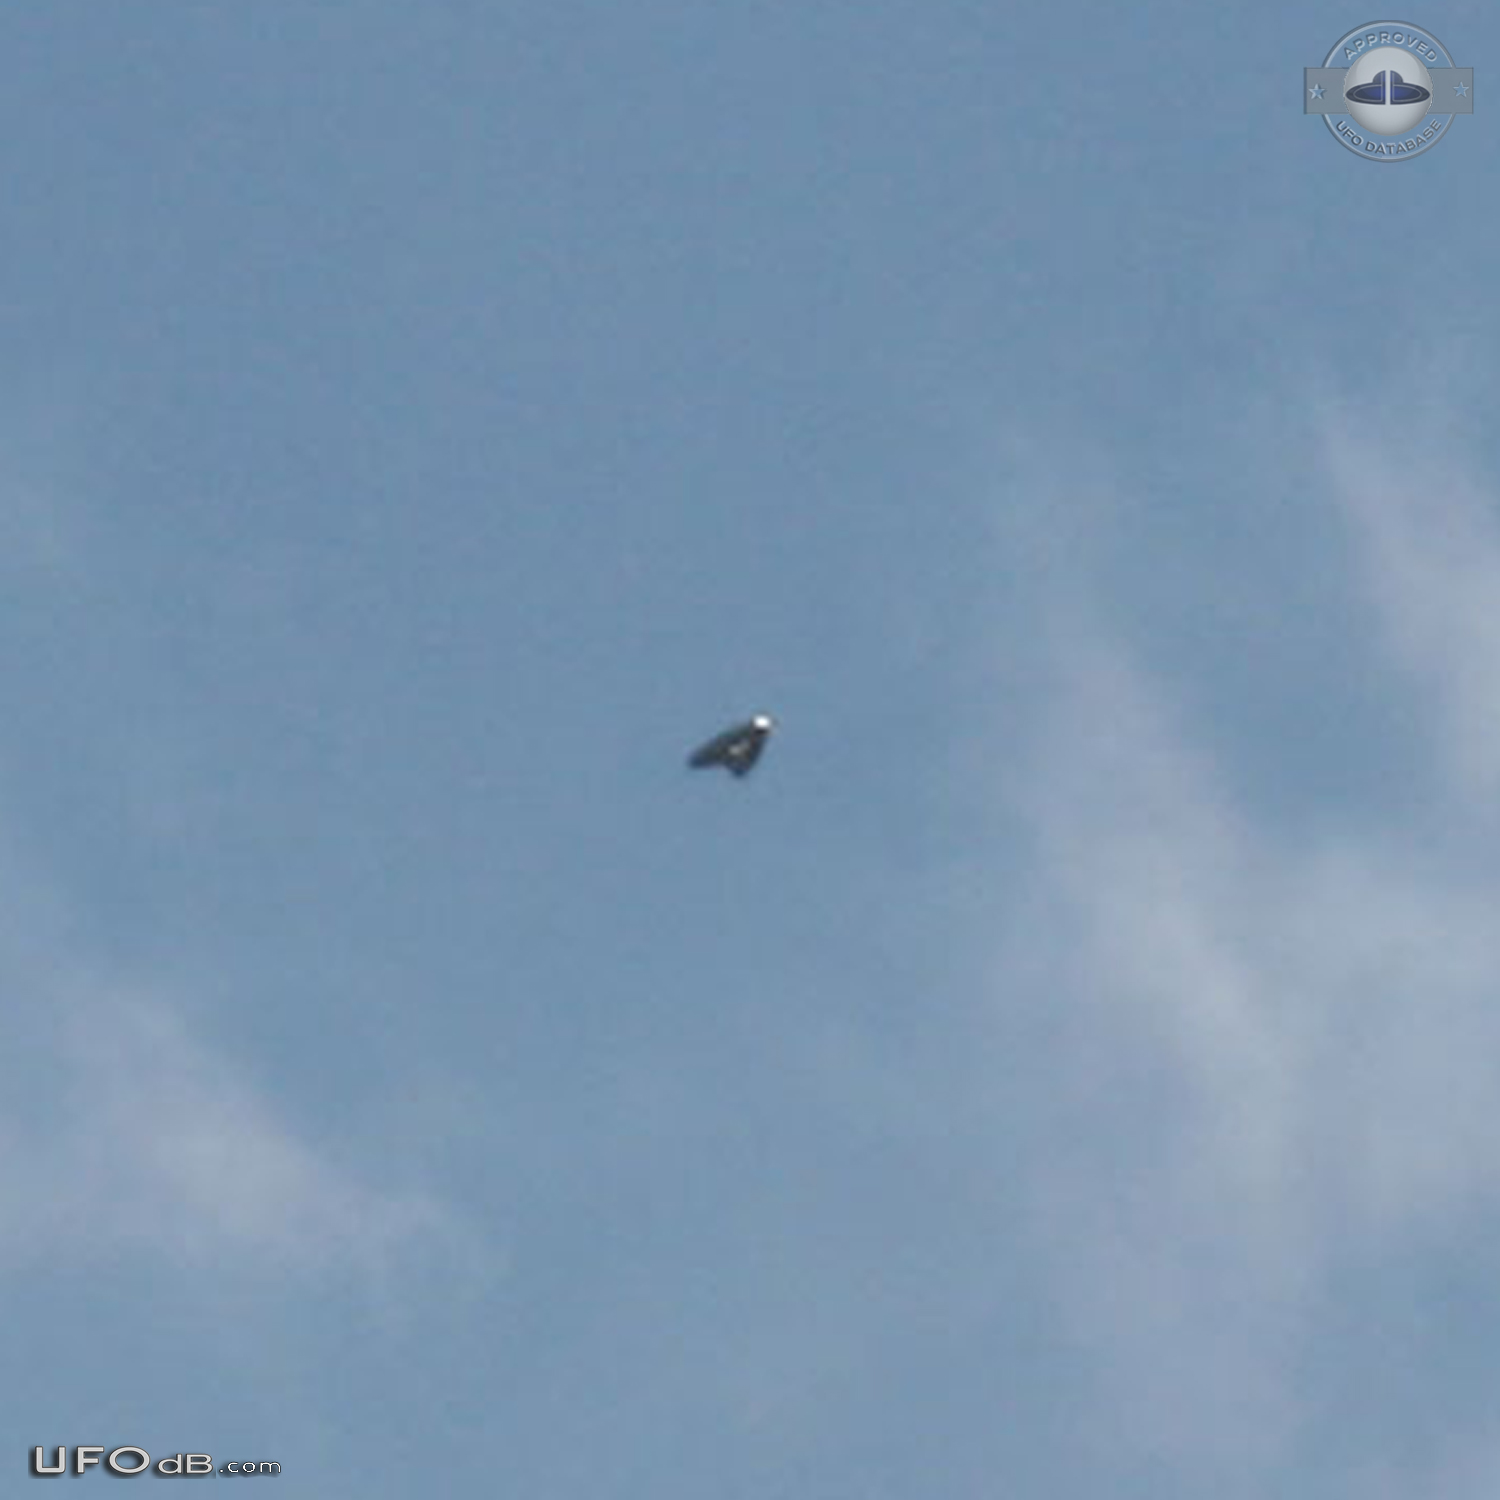 Watched UFO first in the west move quickly through to north east - Gle UFO Picture #740-4